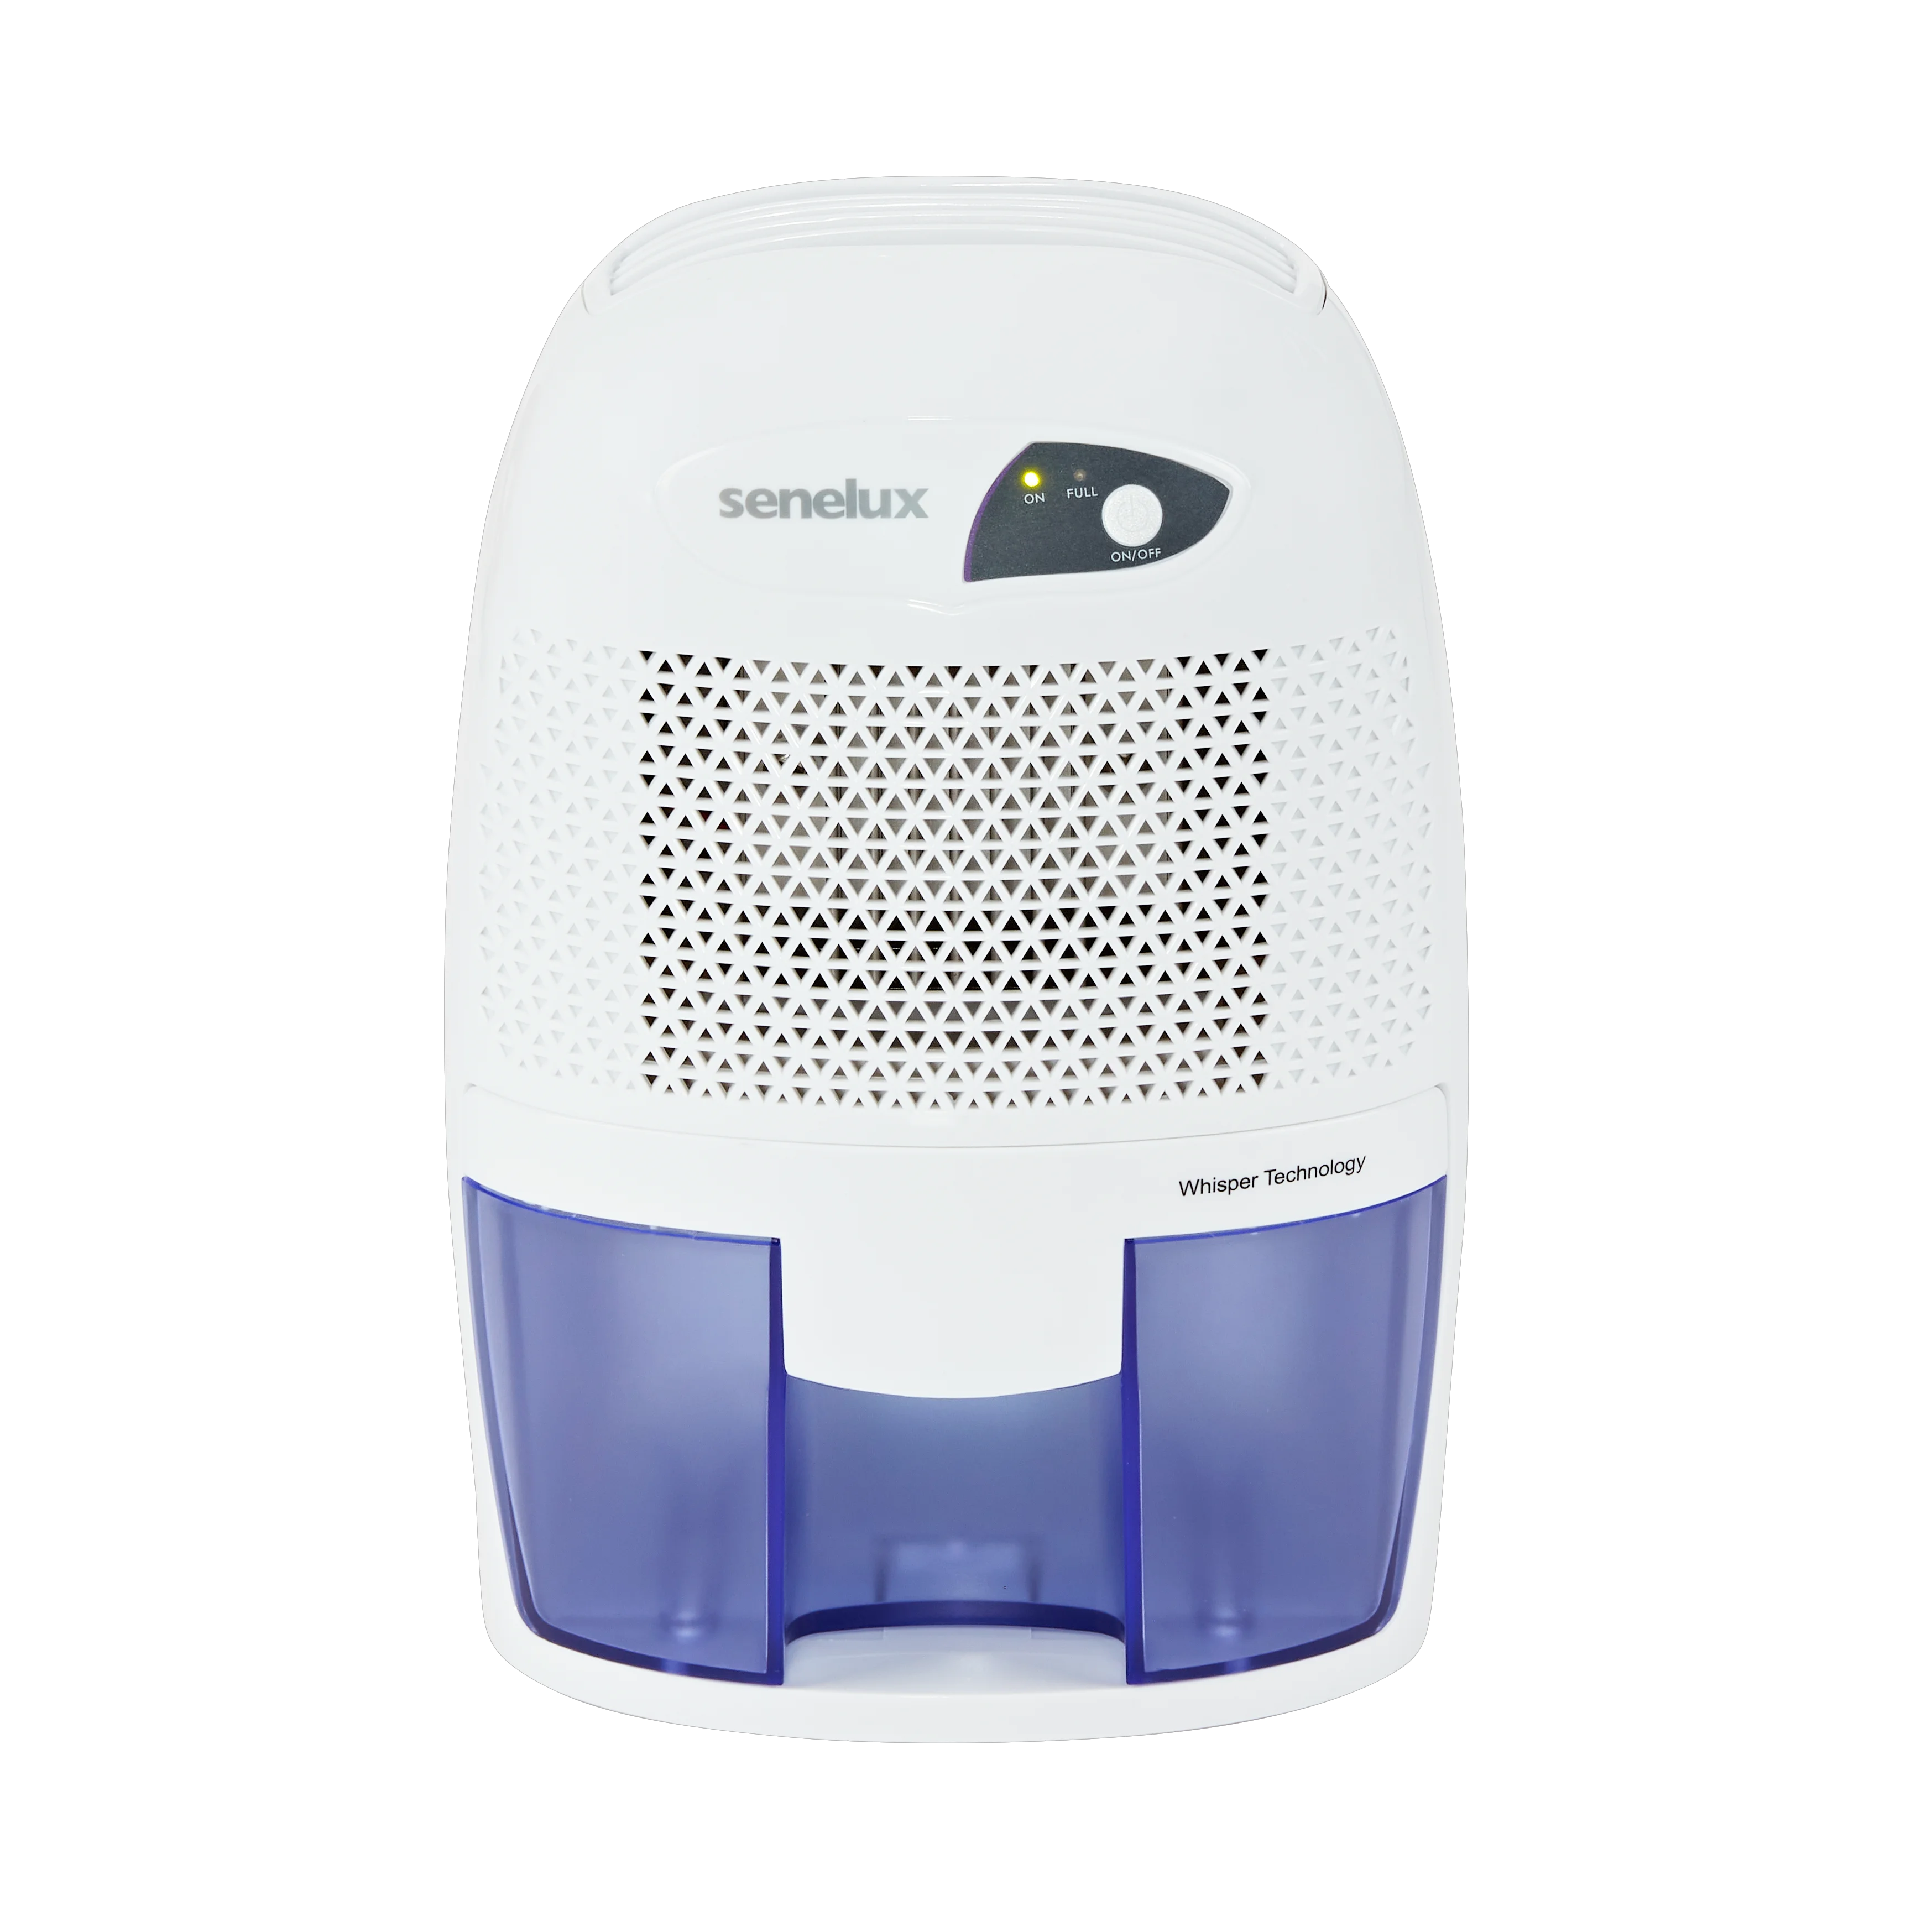 An image of the Senelux mini dehumidifier with an all white design, purple water tank and orange "on" light.